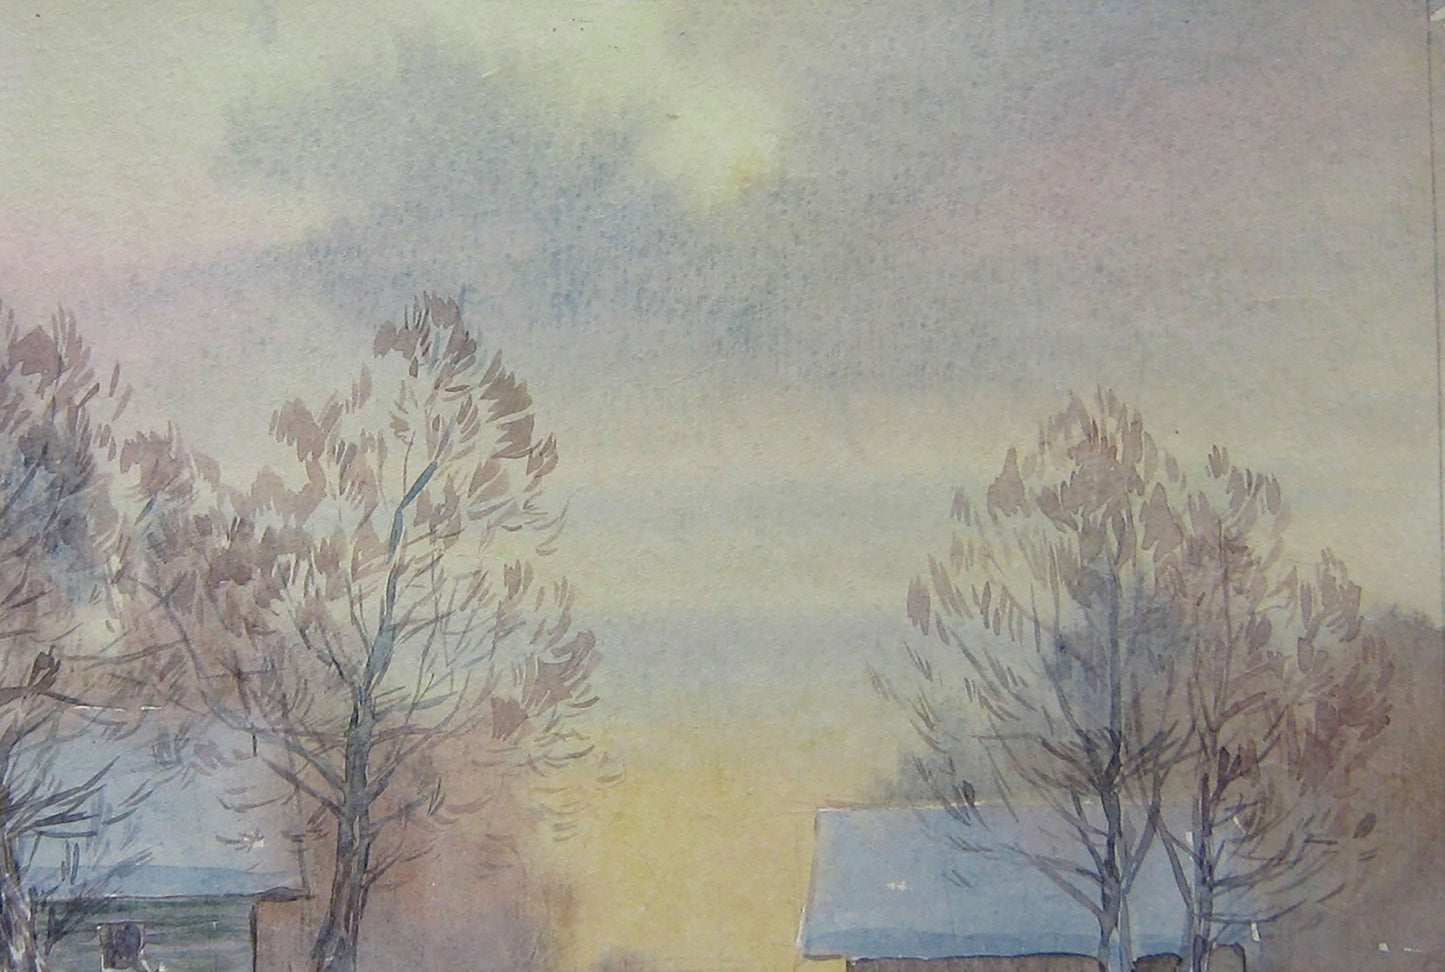 Watercolor painting Watching the Winter Sun Fade Away by Valery Savenets